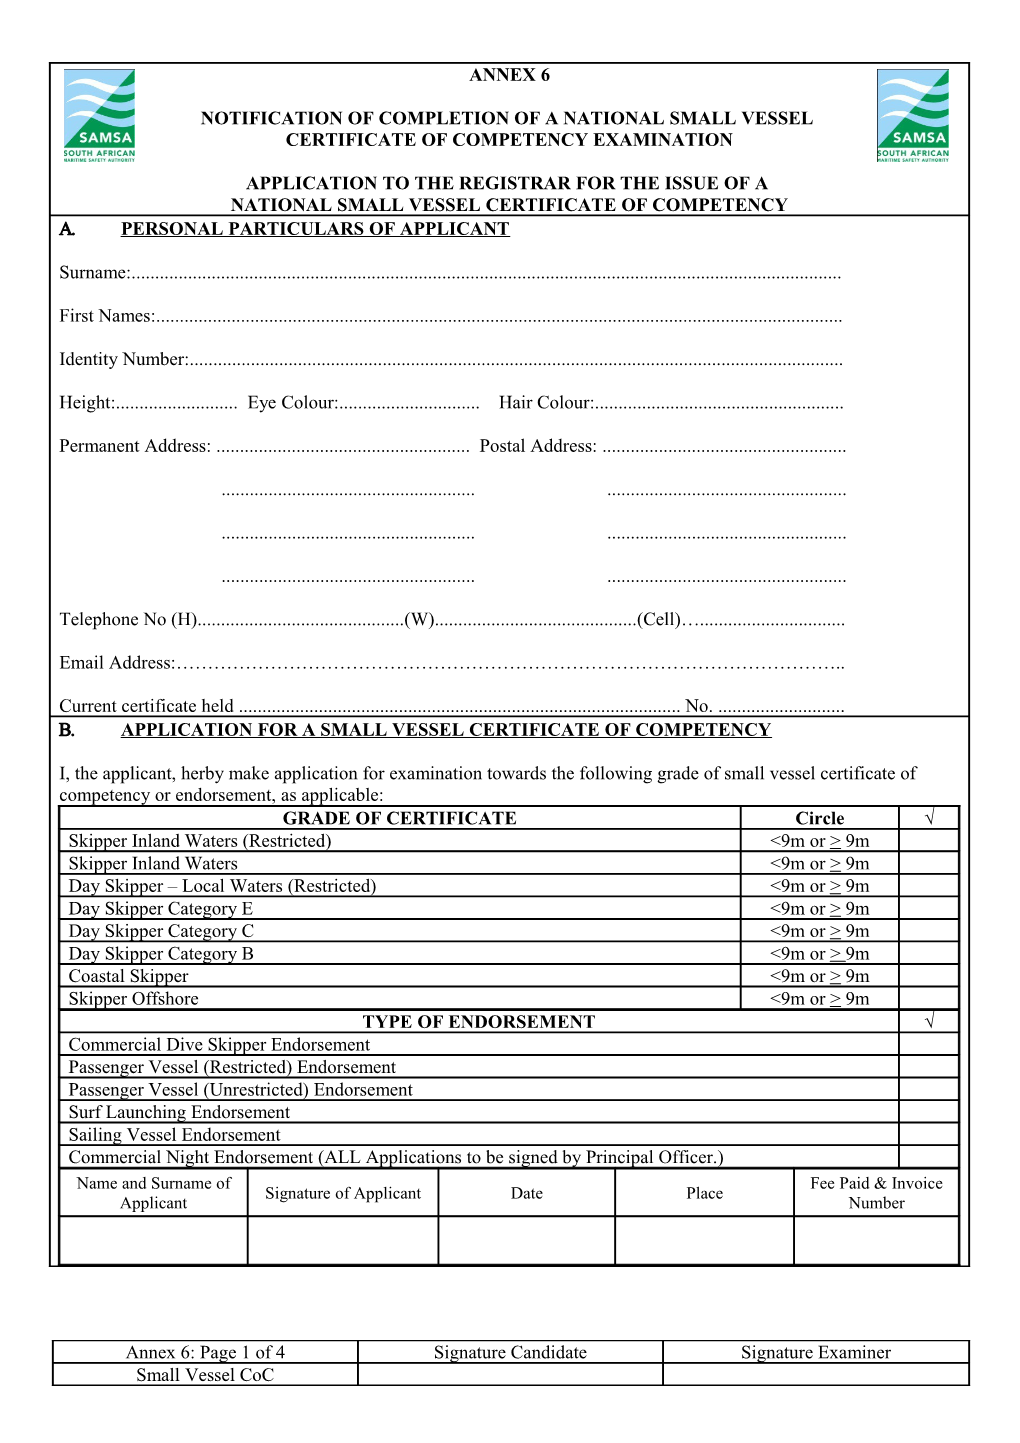 Application for a Small Vessel Certificate of Competency